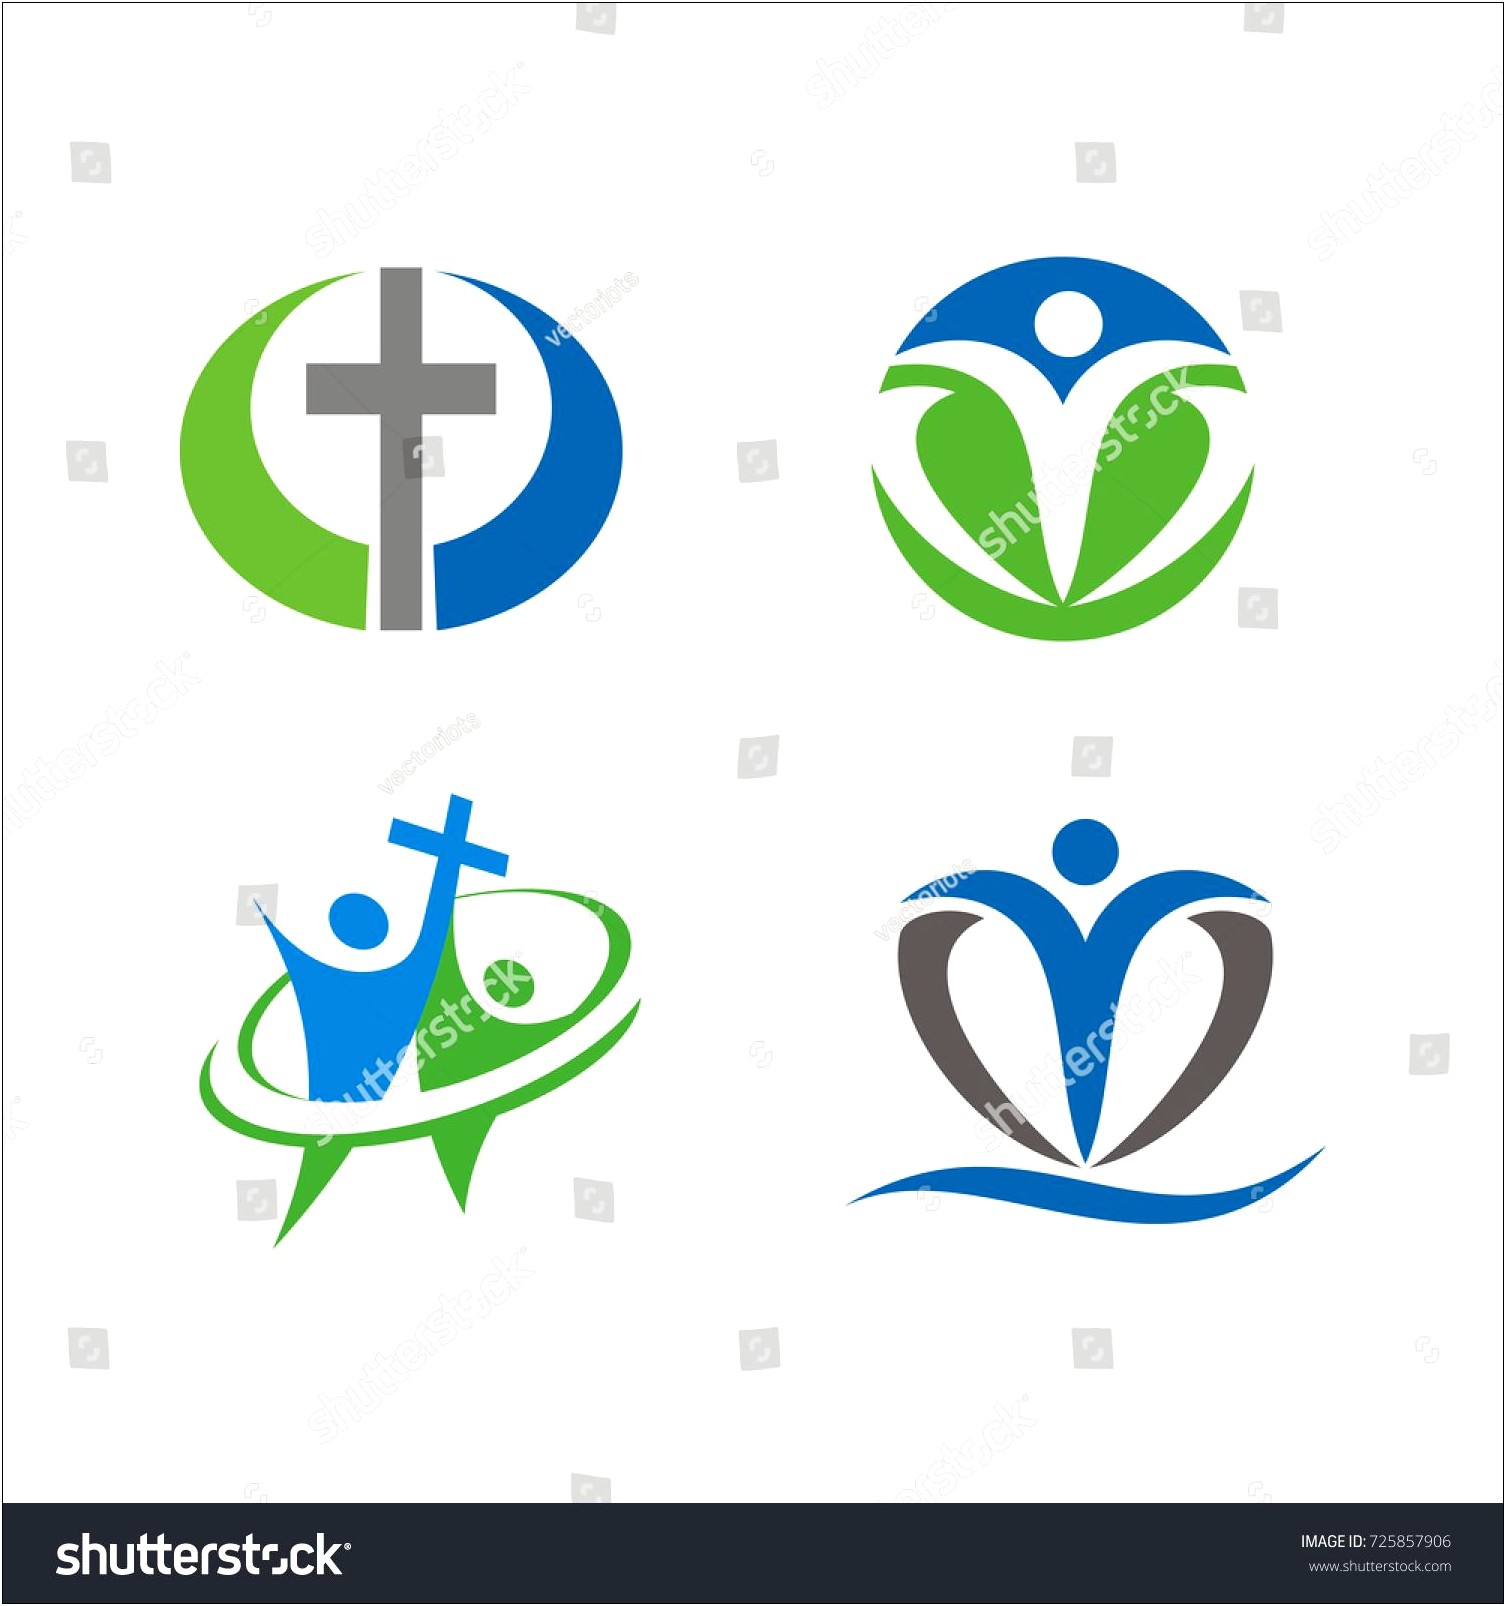 Free Images For Religious Logo Templates